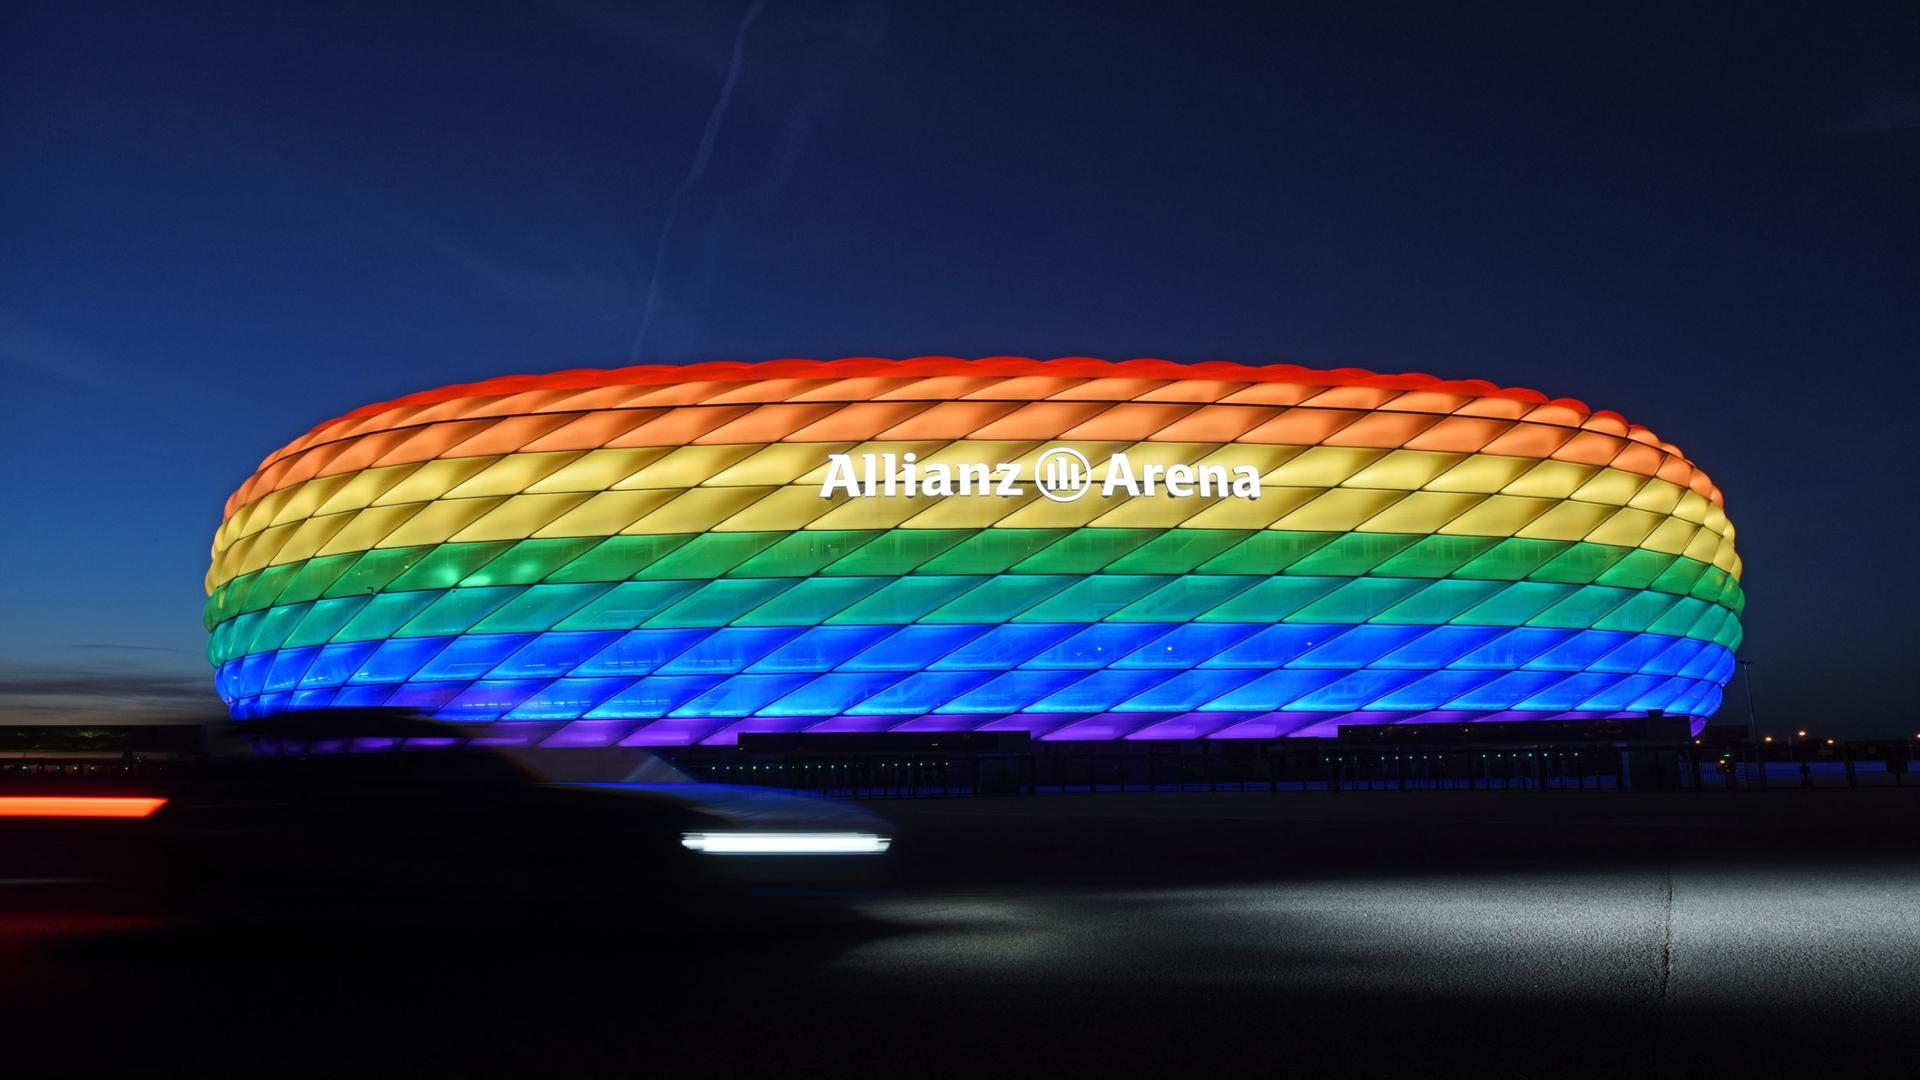 The Allianz Arean in Munich is shown illuminated in the colors of the rainbow with the night sky in the background.